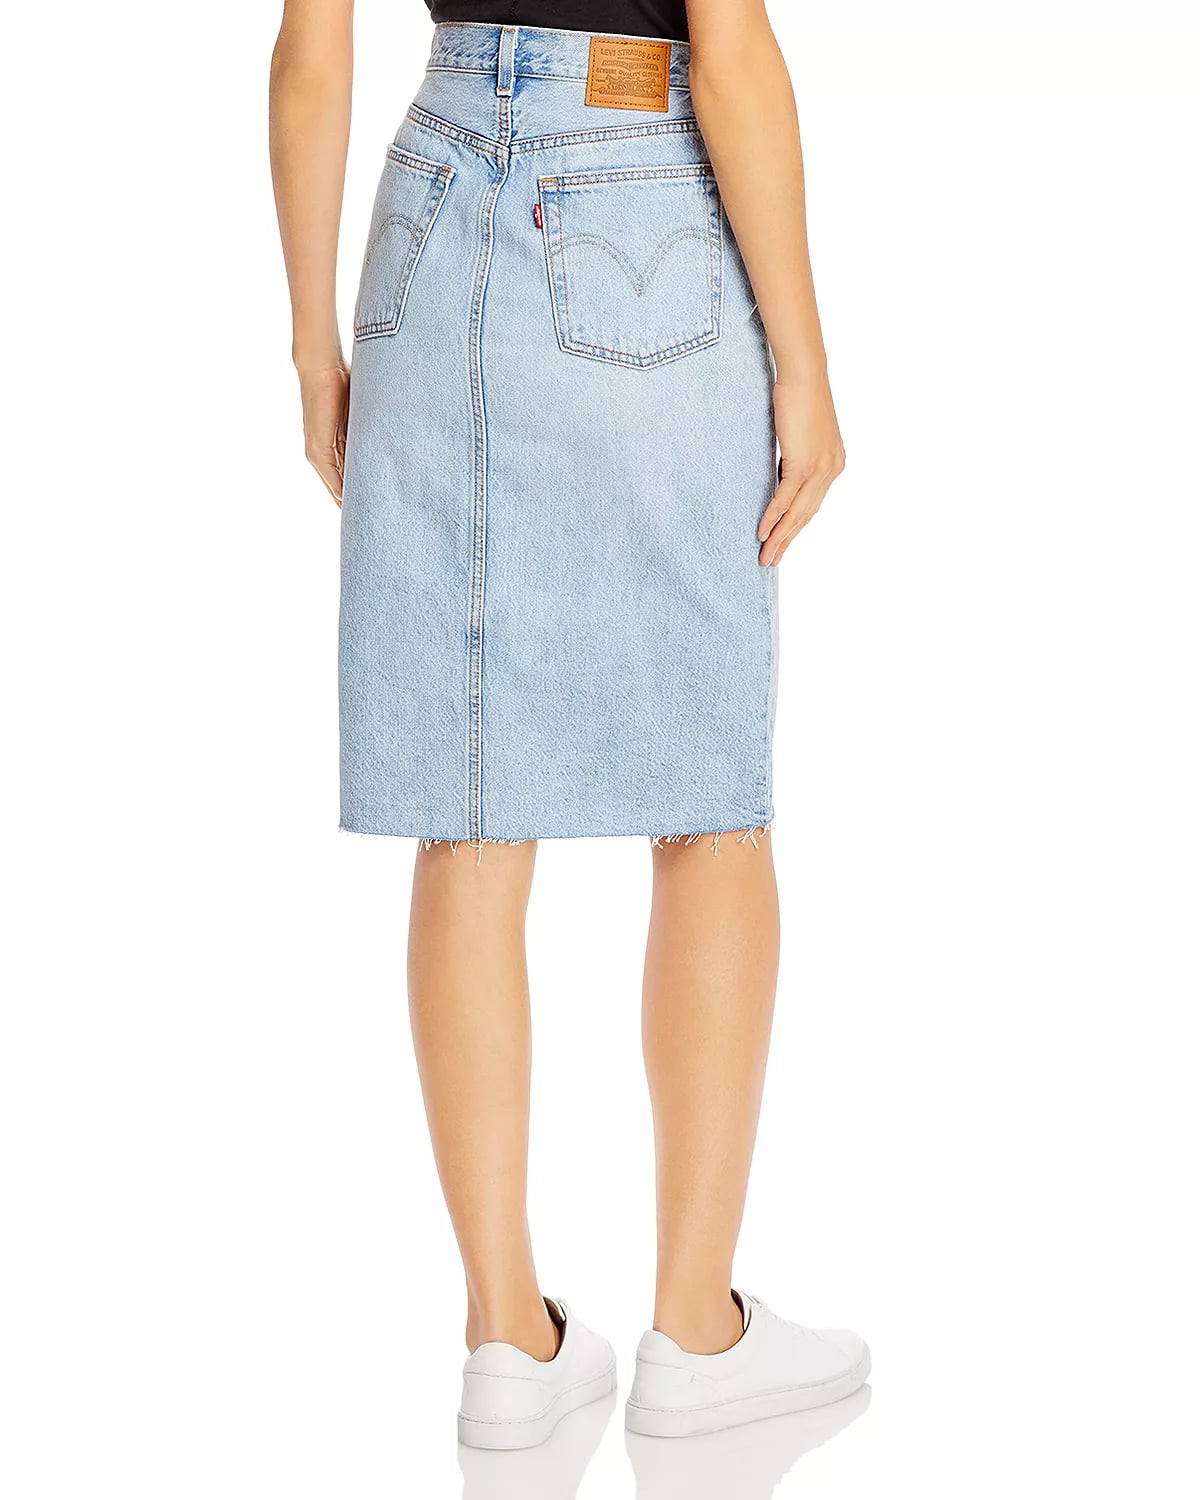 Levi's Frayed Hem Denim Skirt | Outfit Obsession: Katie Holmes in a Denim  Skirt and Birkenstocks — Could She Be Any More '90s? | POPSUGAR Fashion  Photo 6